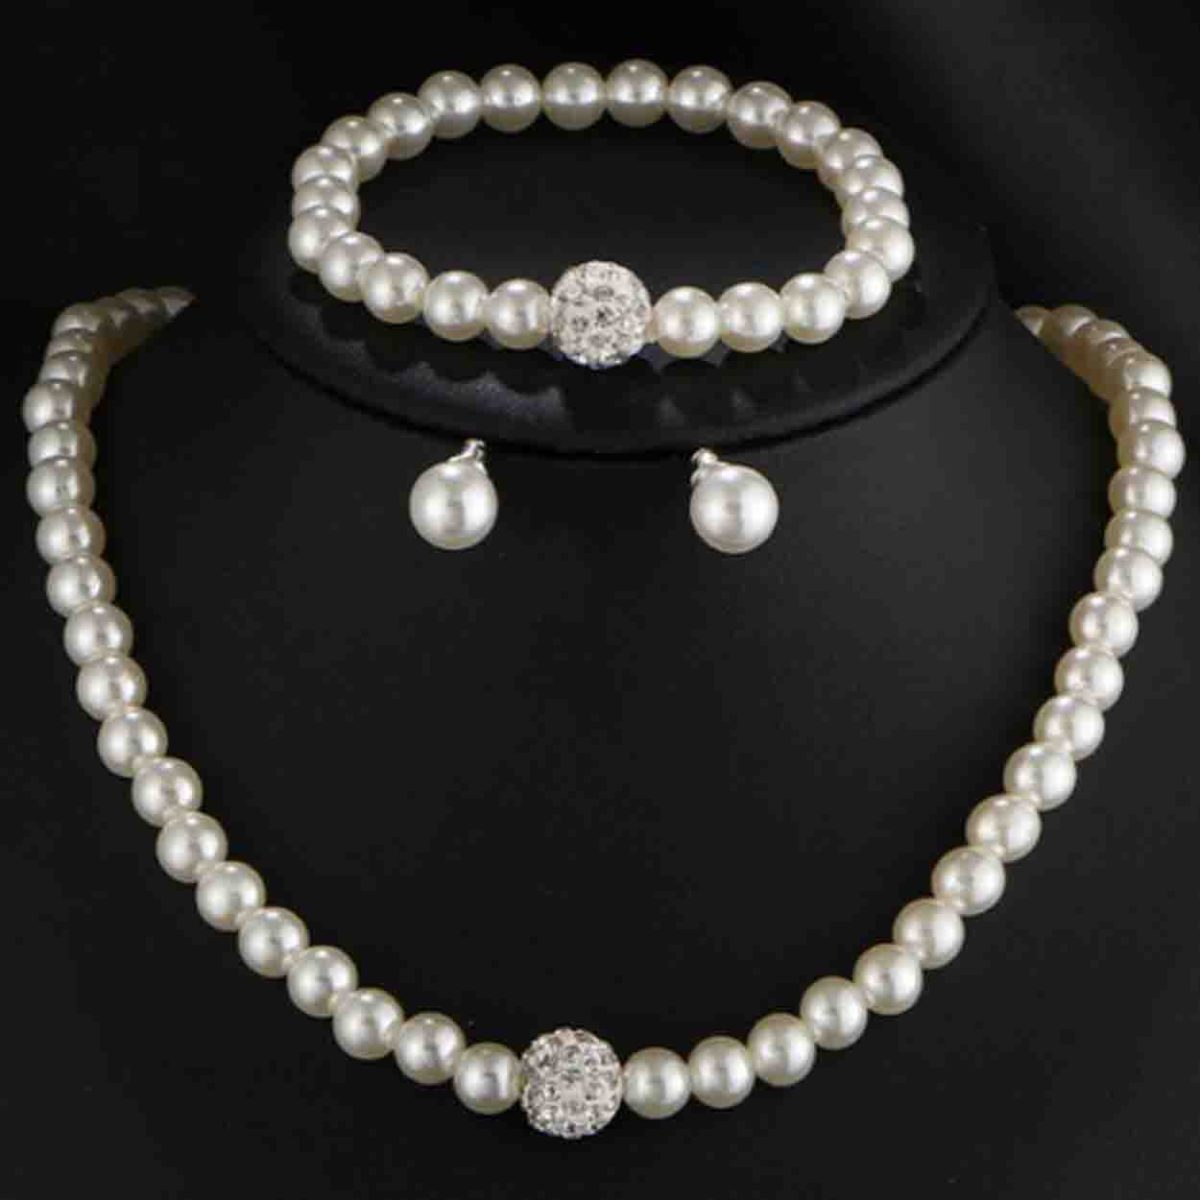 A necklace, earrings, and a bracelet made of faux pearls in clusters and strands with silver-tone metal accents. The jewelry set is called Pearl Essence.